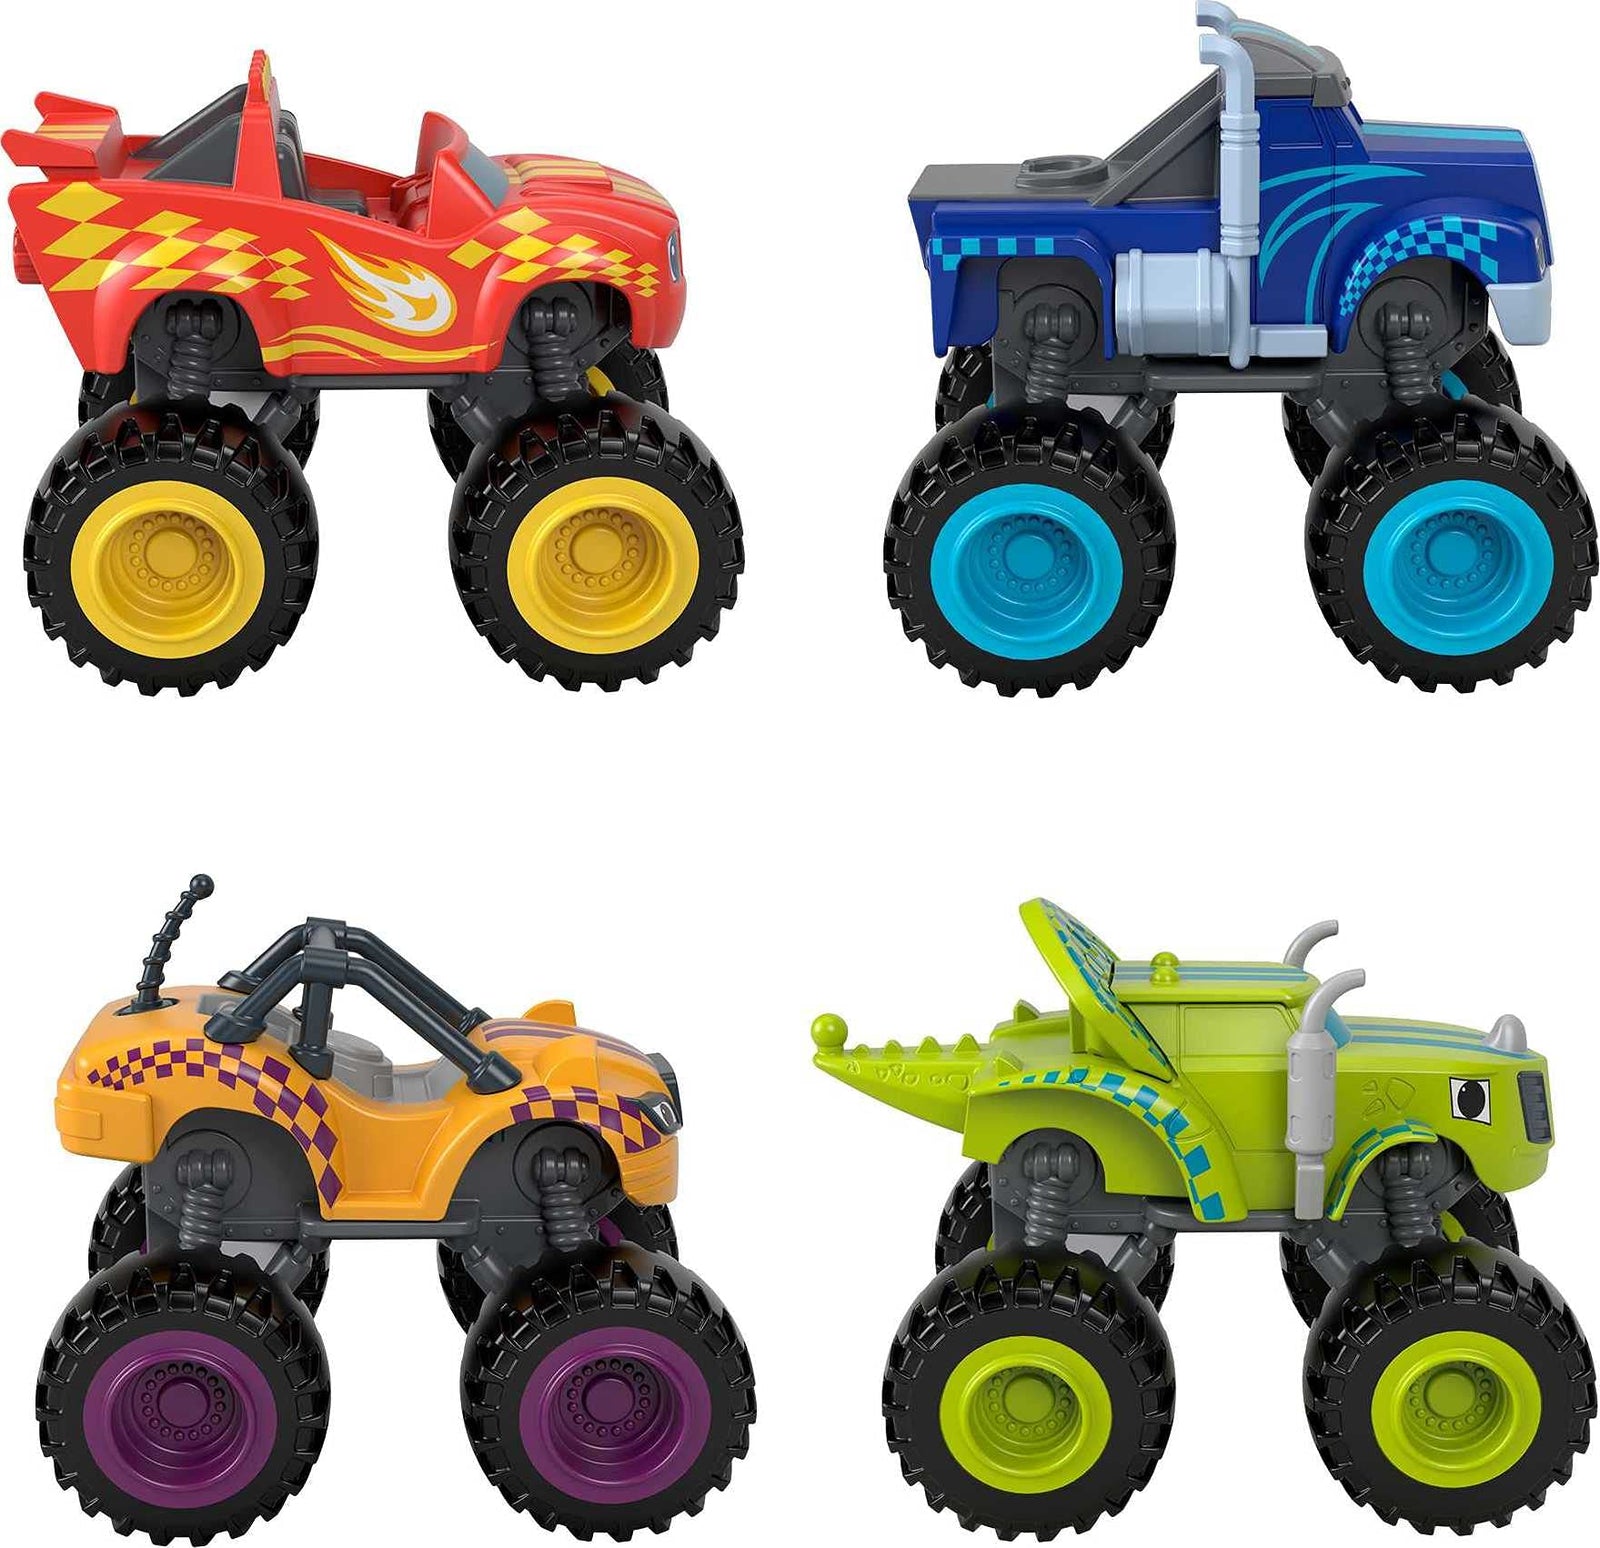 Fisher-Price Blaze and The Monster Machines Racers 4 Pack, Set of Die-Cast Metal Push-Along Vehicles for Preschool Kids Ages 3 Years and Older